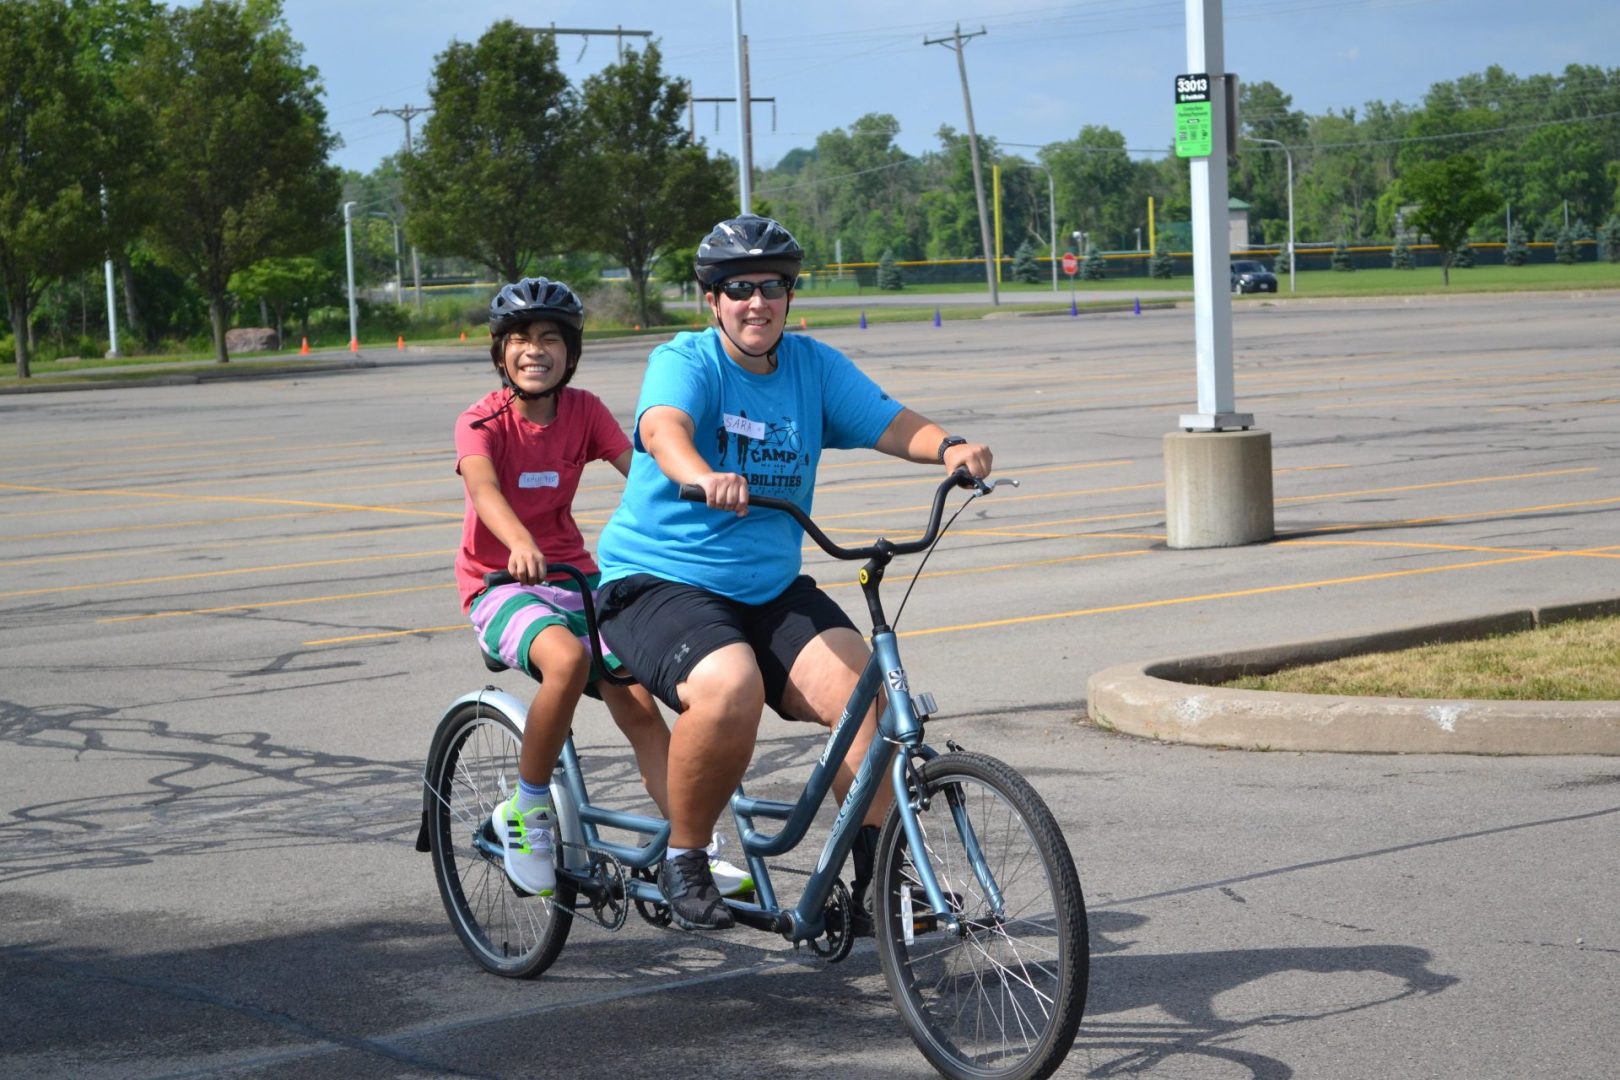 Coach and athlete riding a tandem bike. Coach is smiling wearing a blue shirt with black shorts and athlete is smiling wearing a red shirt with striped pink and blue shorts.